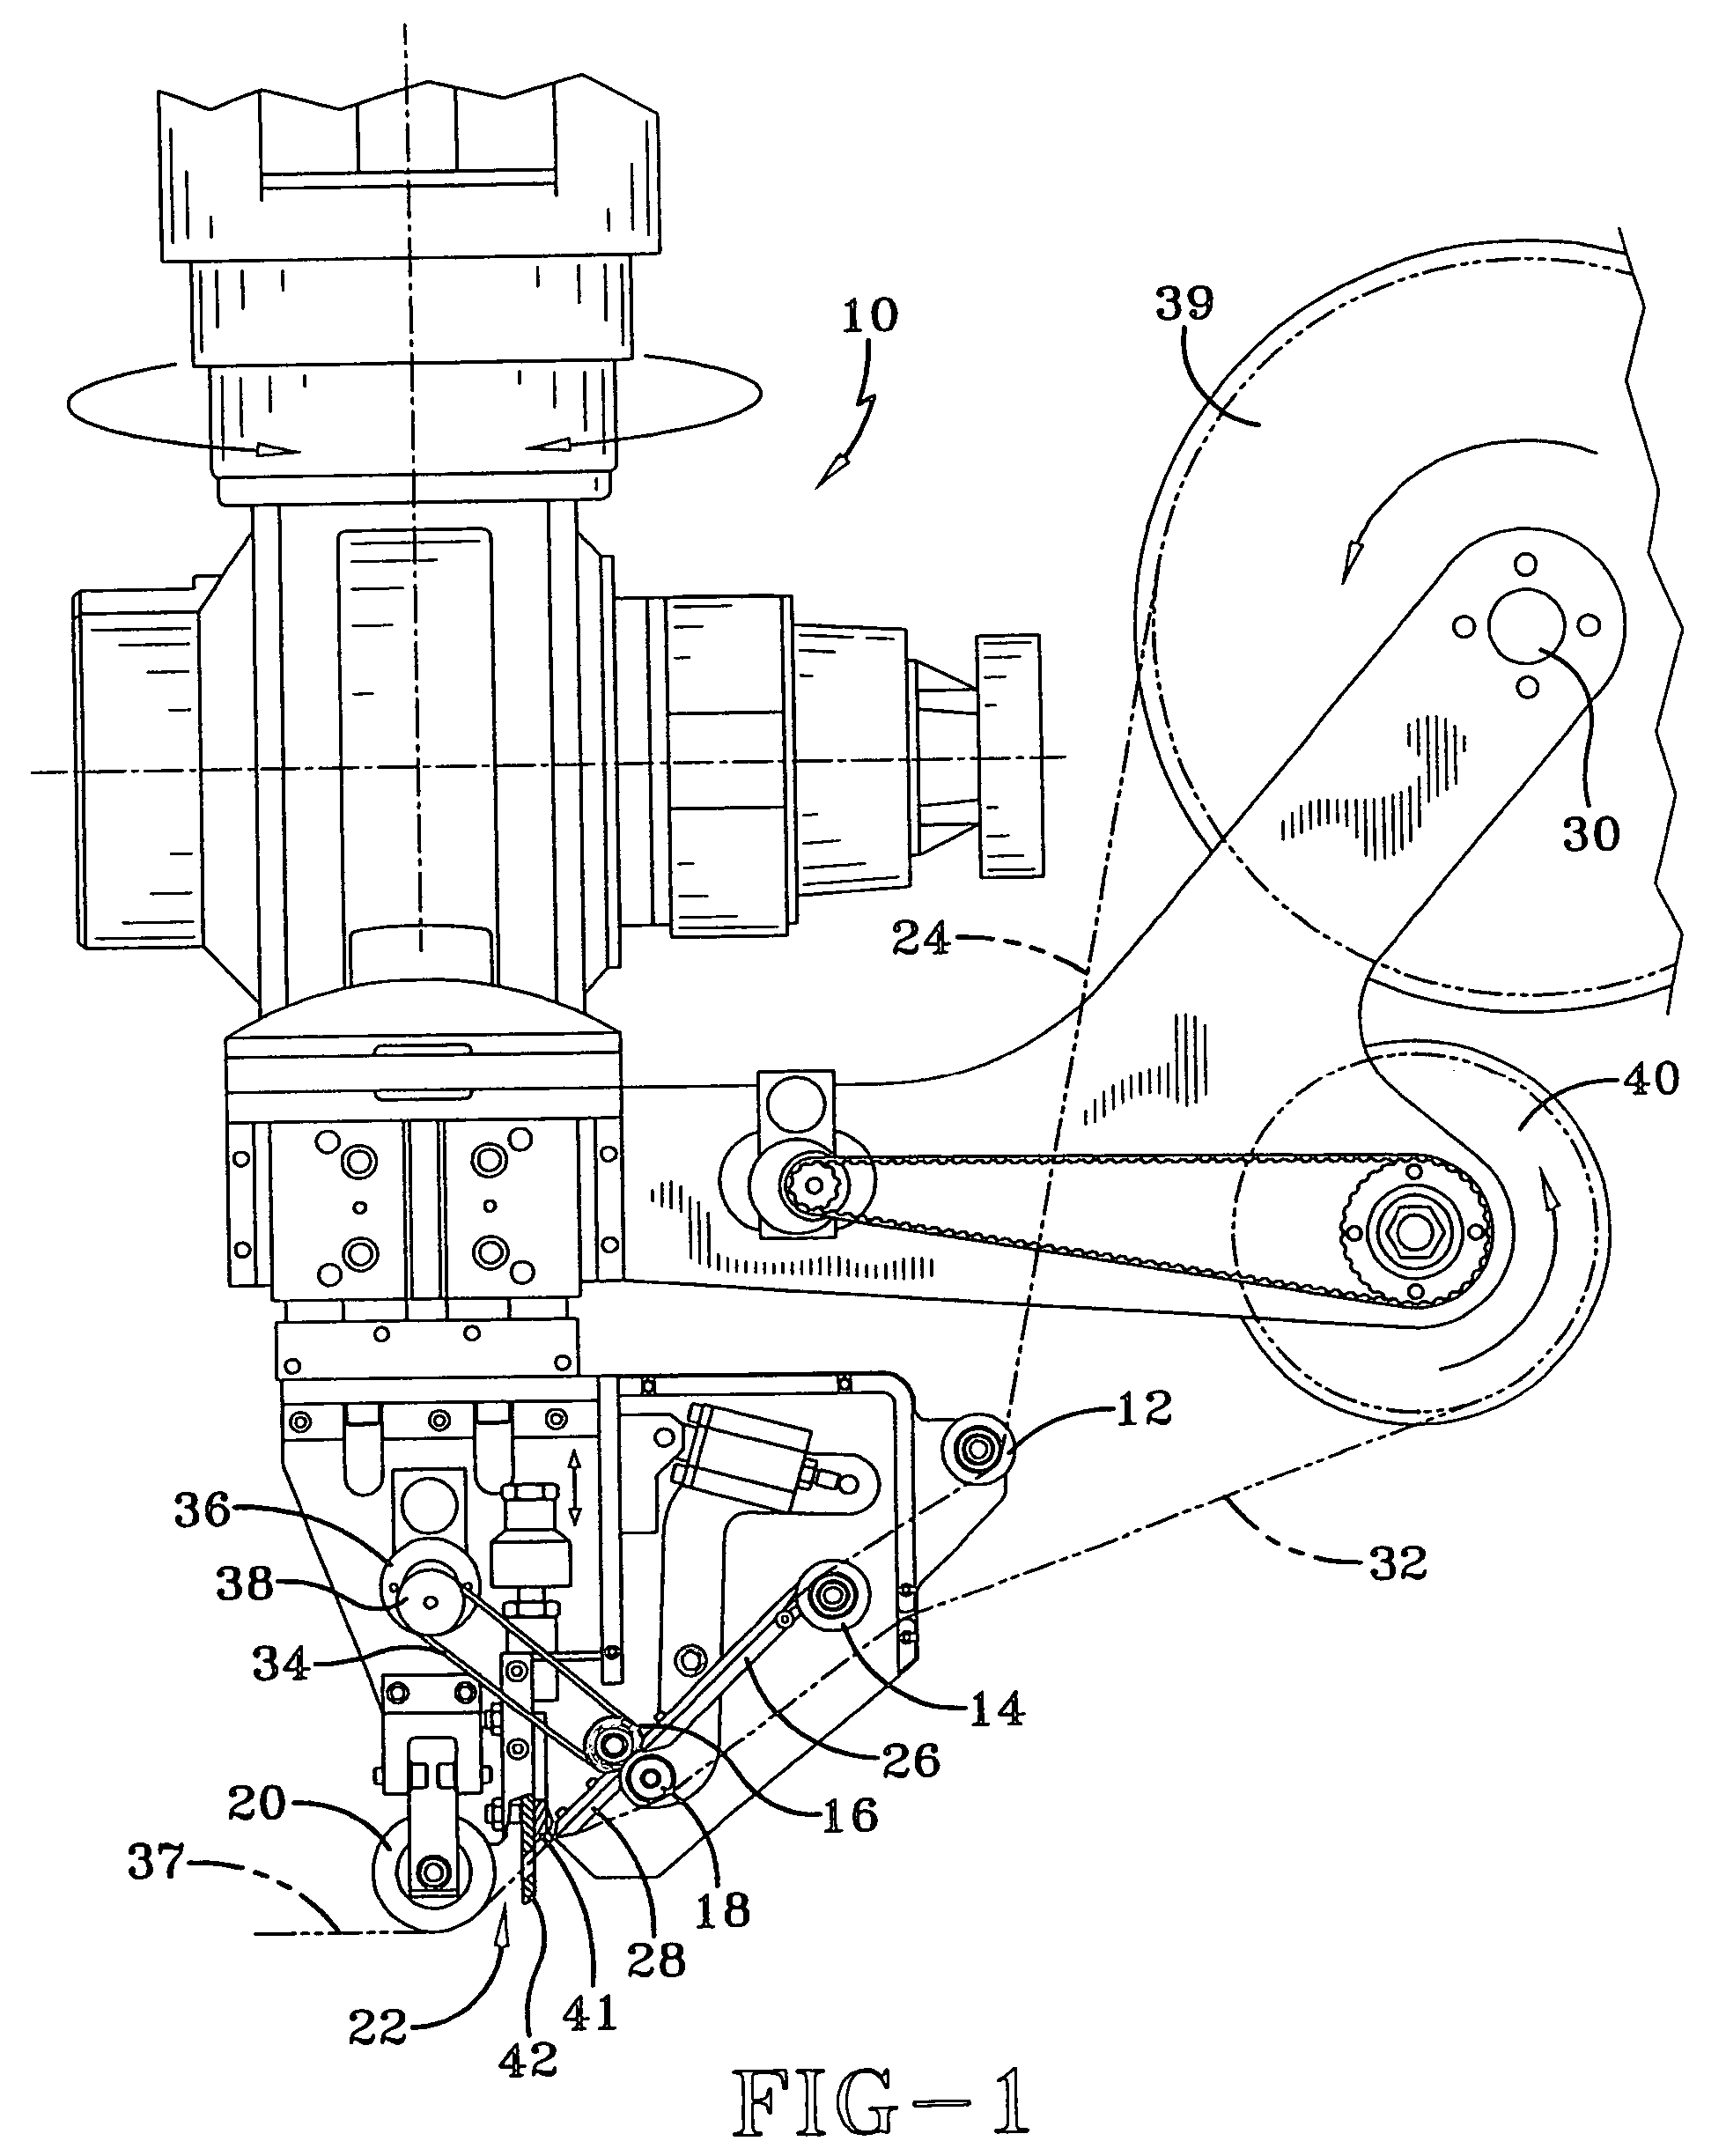 Composite tape laying apparatus and method